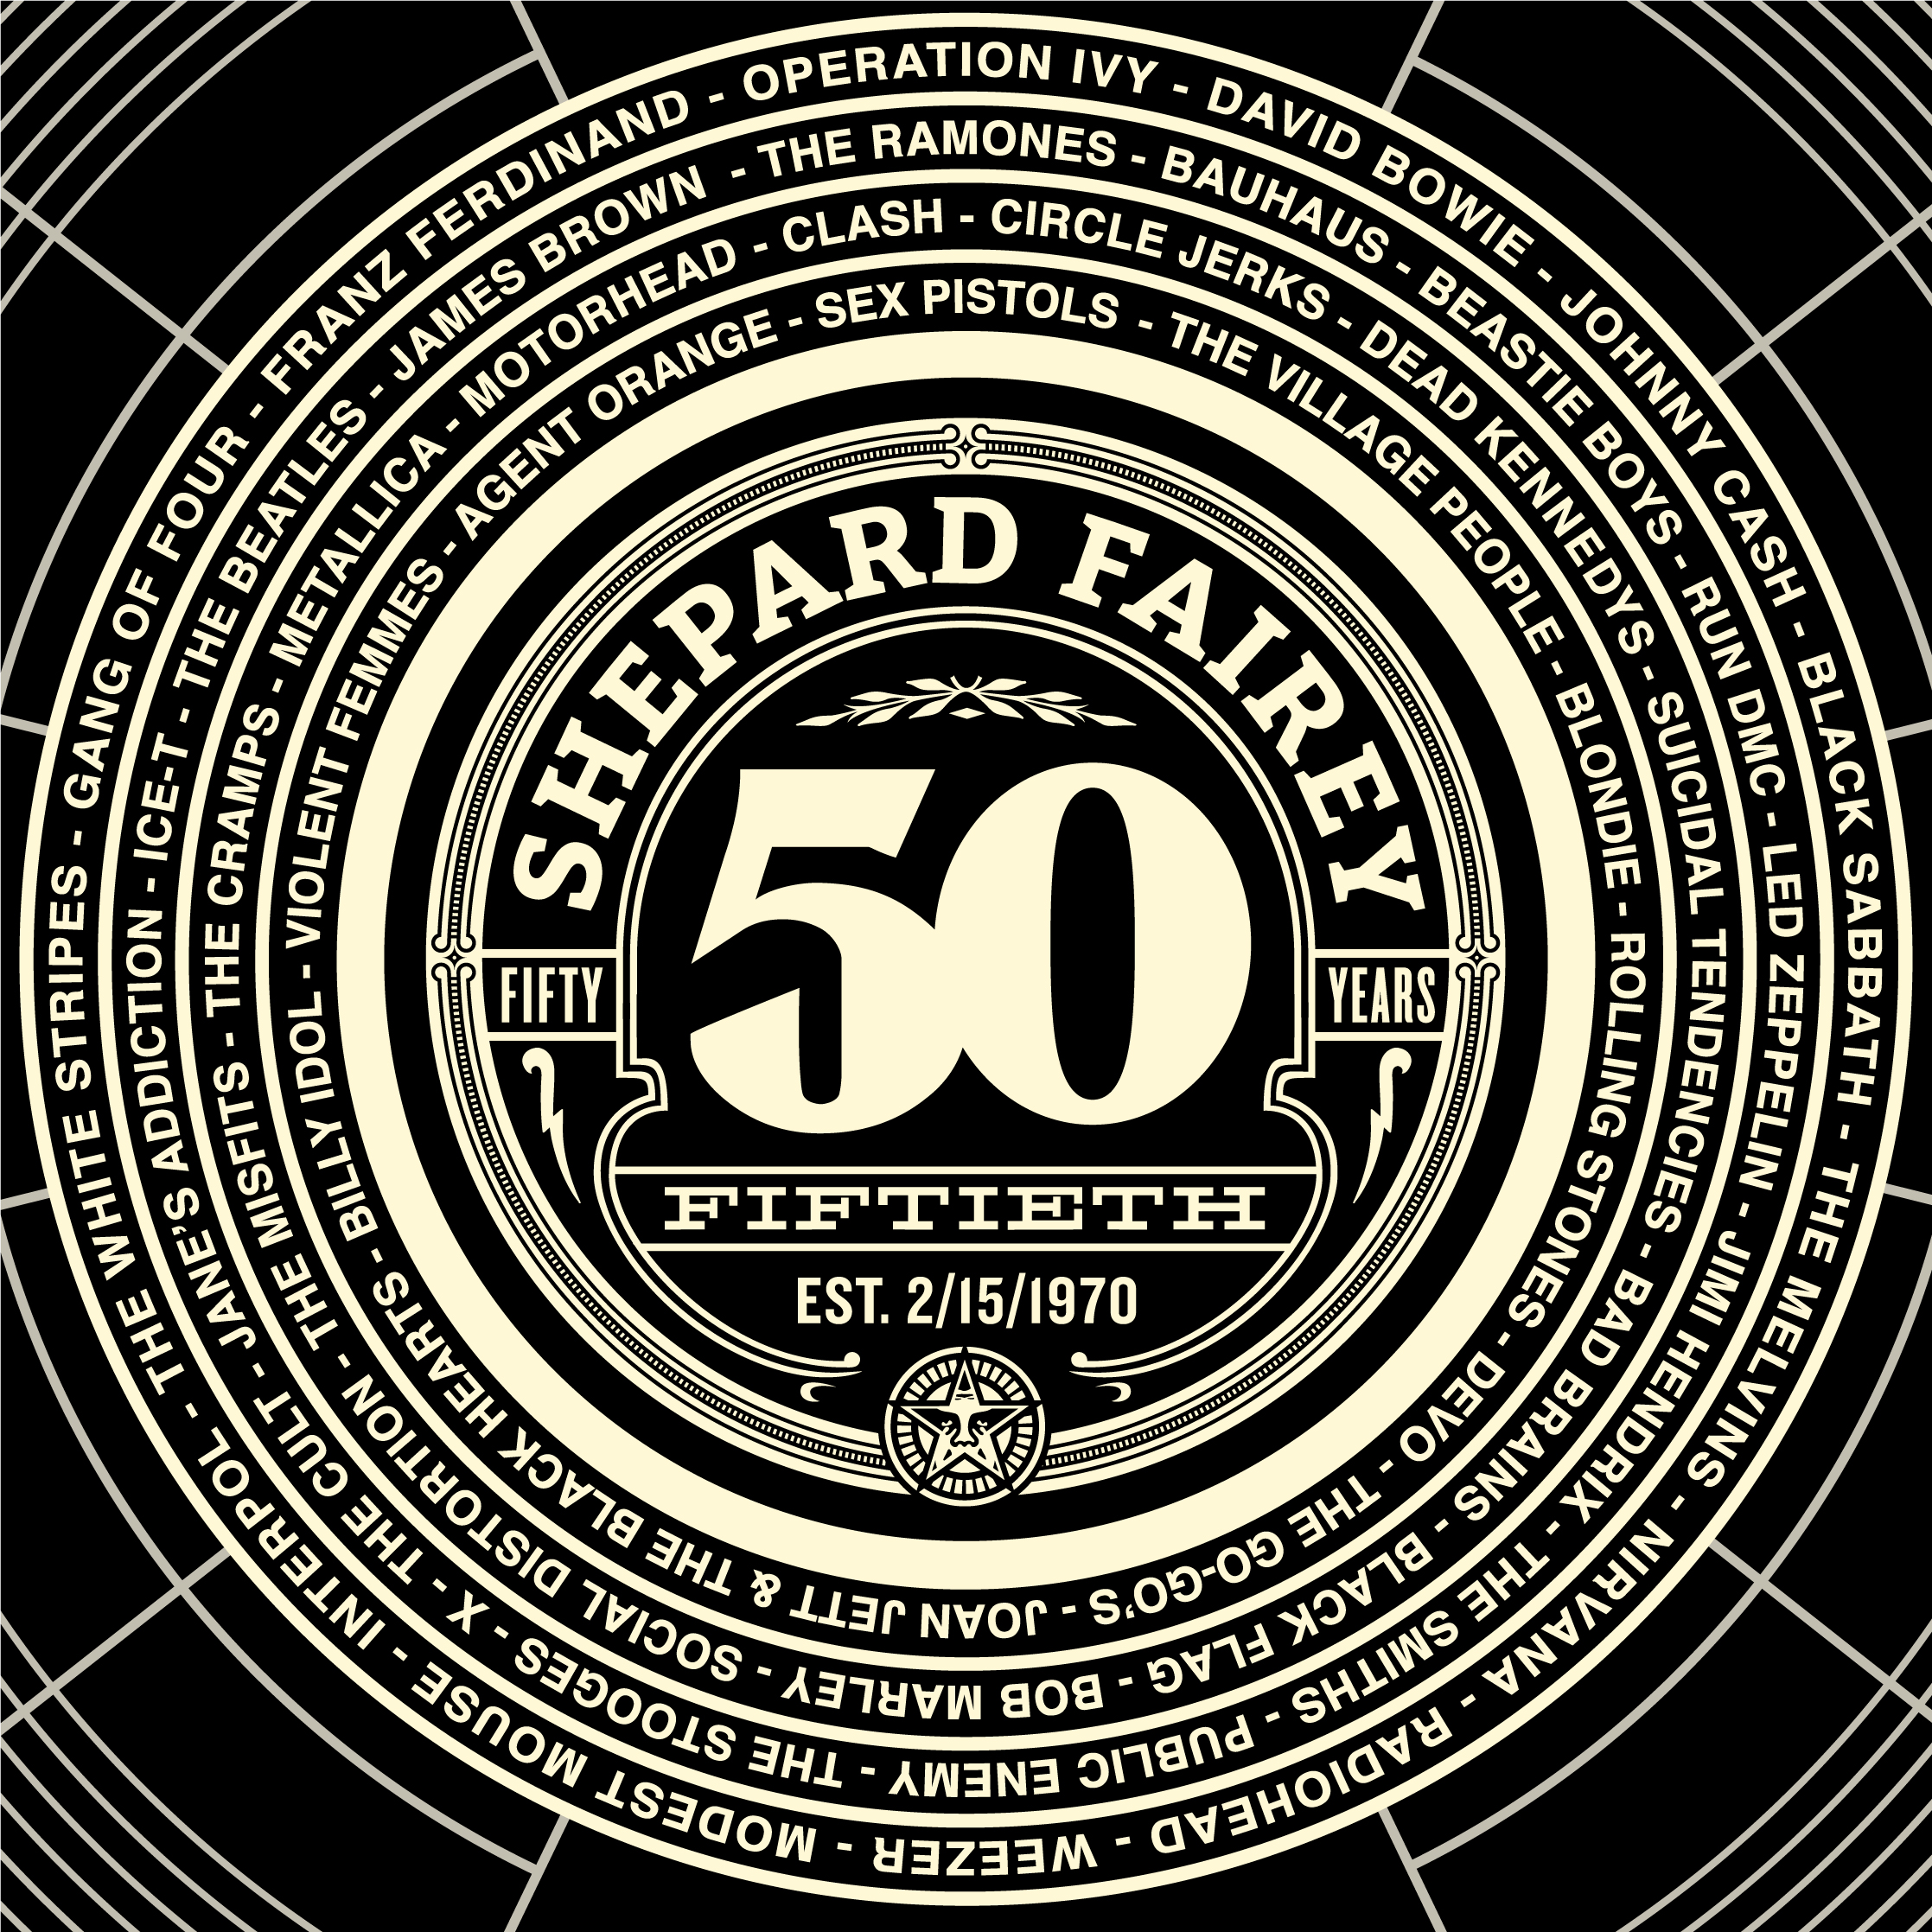 50 At 50 The Soundtrack Of Shepard Fairey Obey Giant Paranoidandroid has 85 repositories available. soundtrack of shepard fairey obey giant